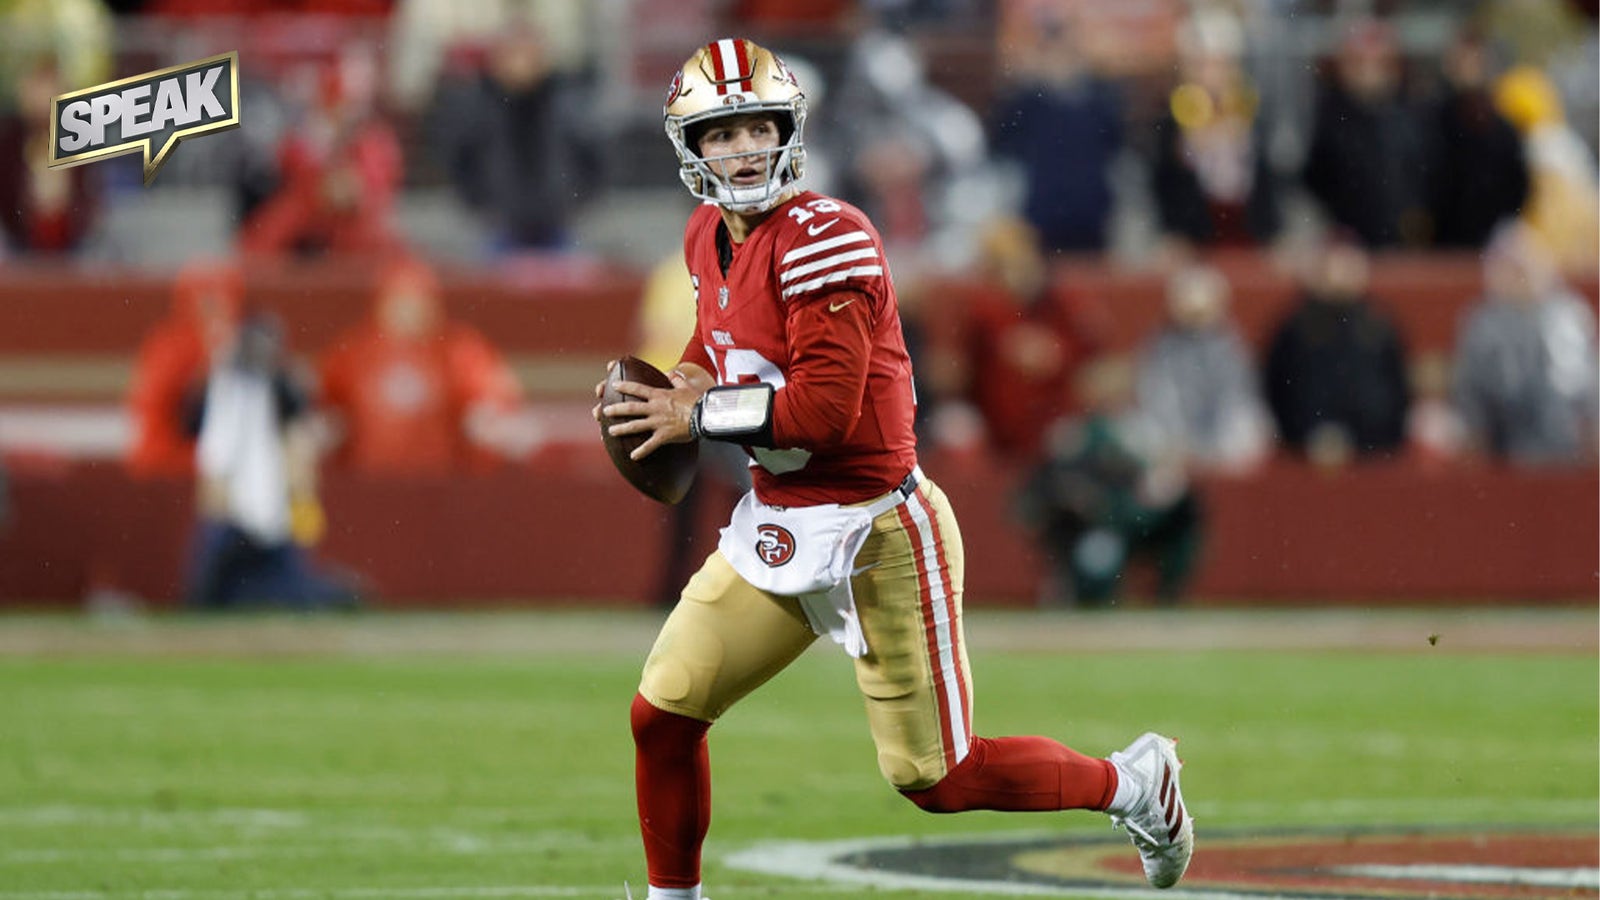 Is Purdy the 49ers' biggest concern heading into NFC Championship Game?